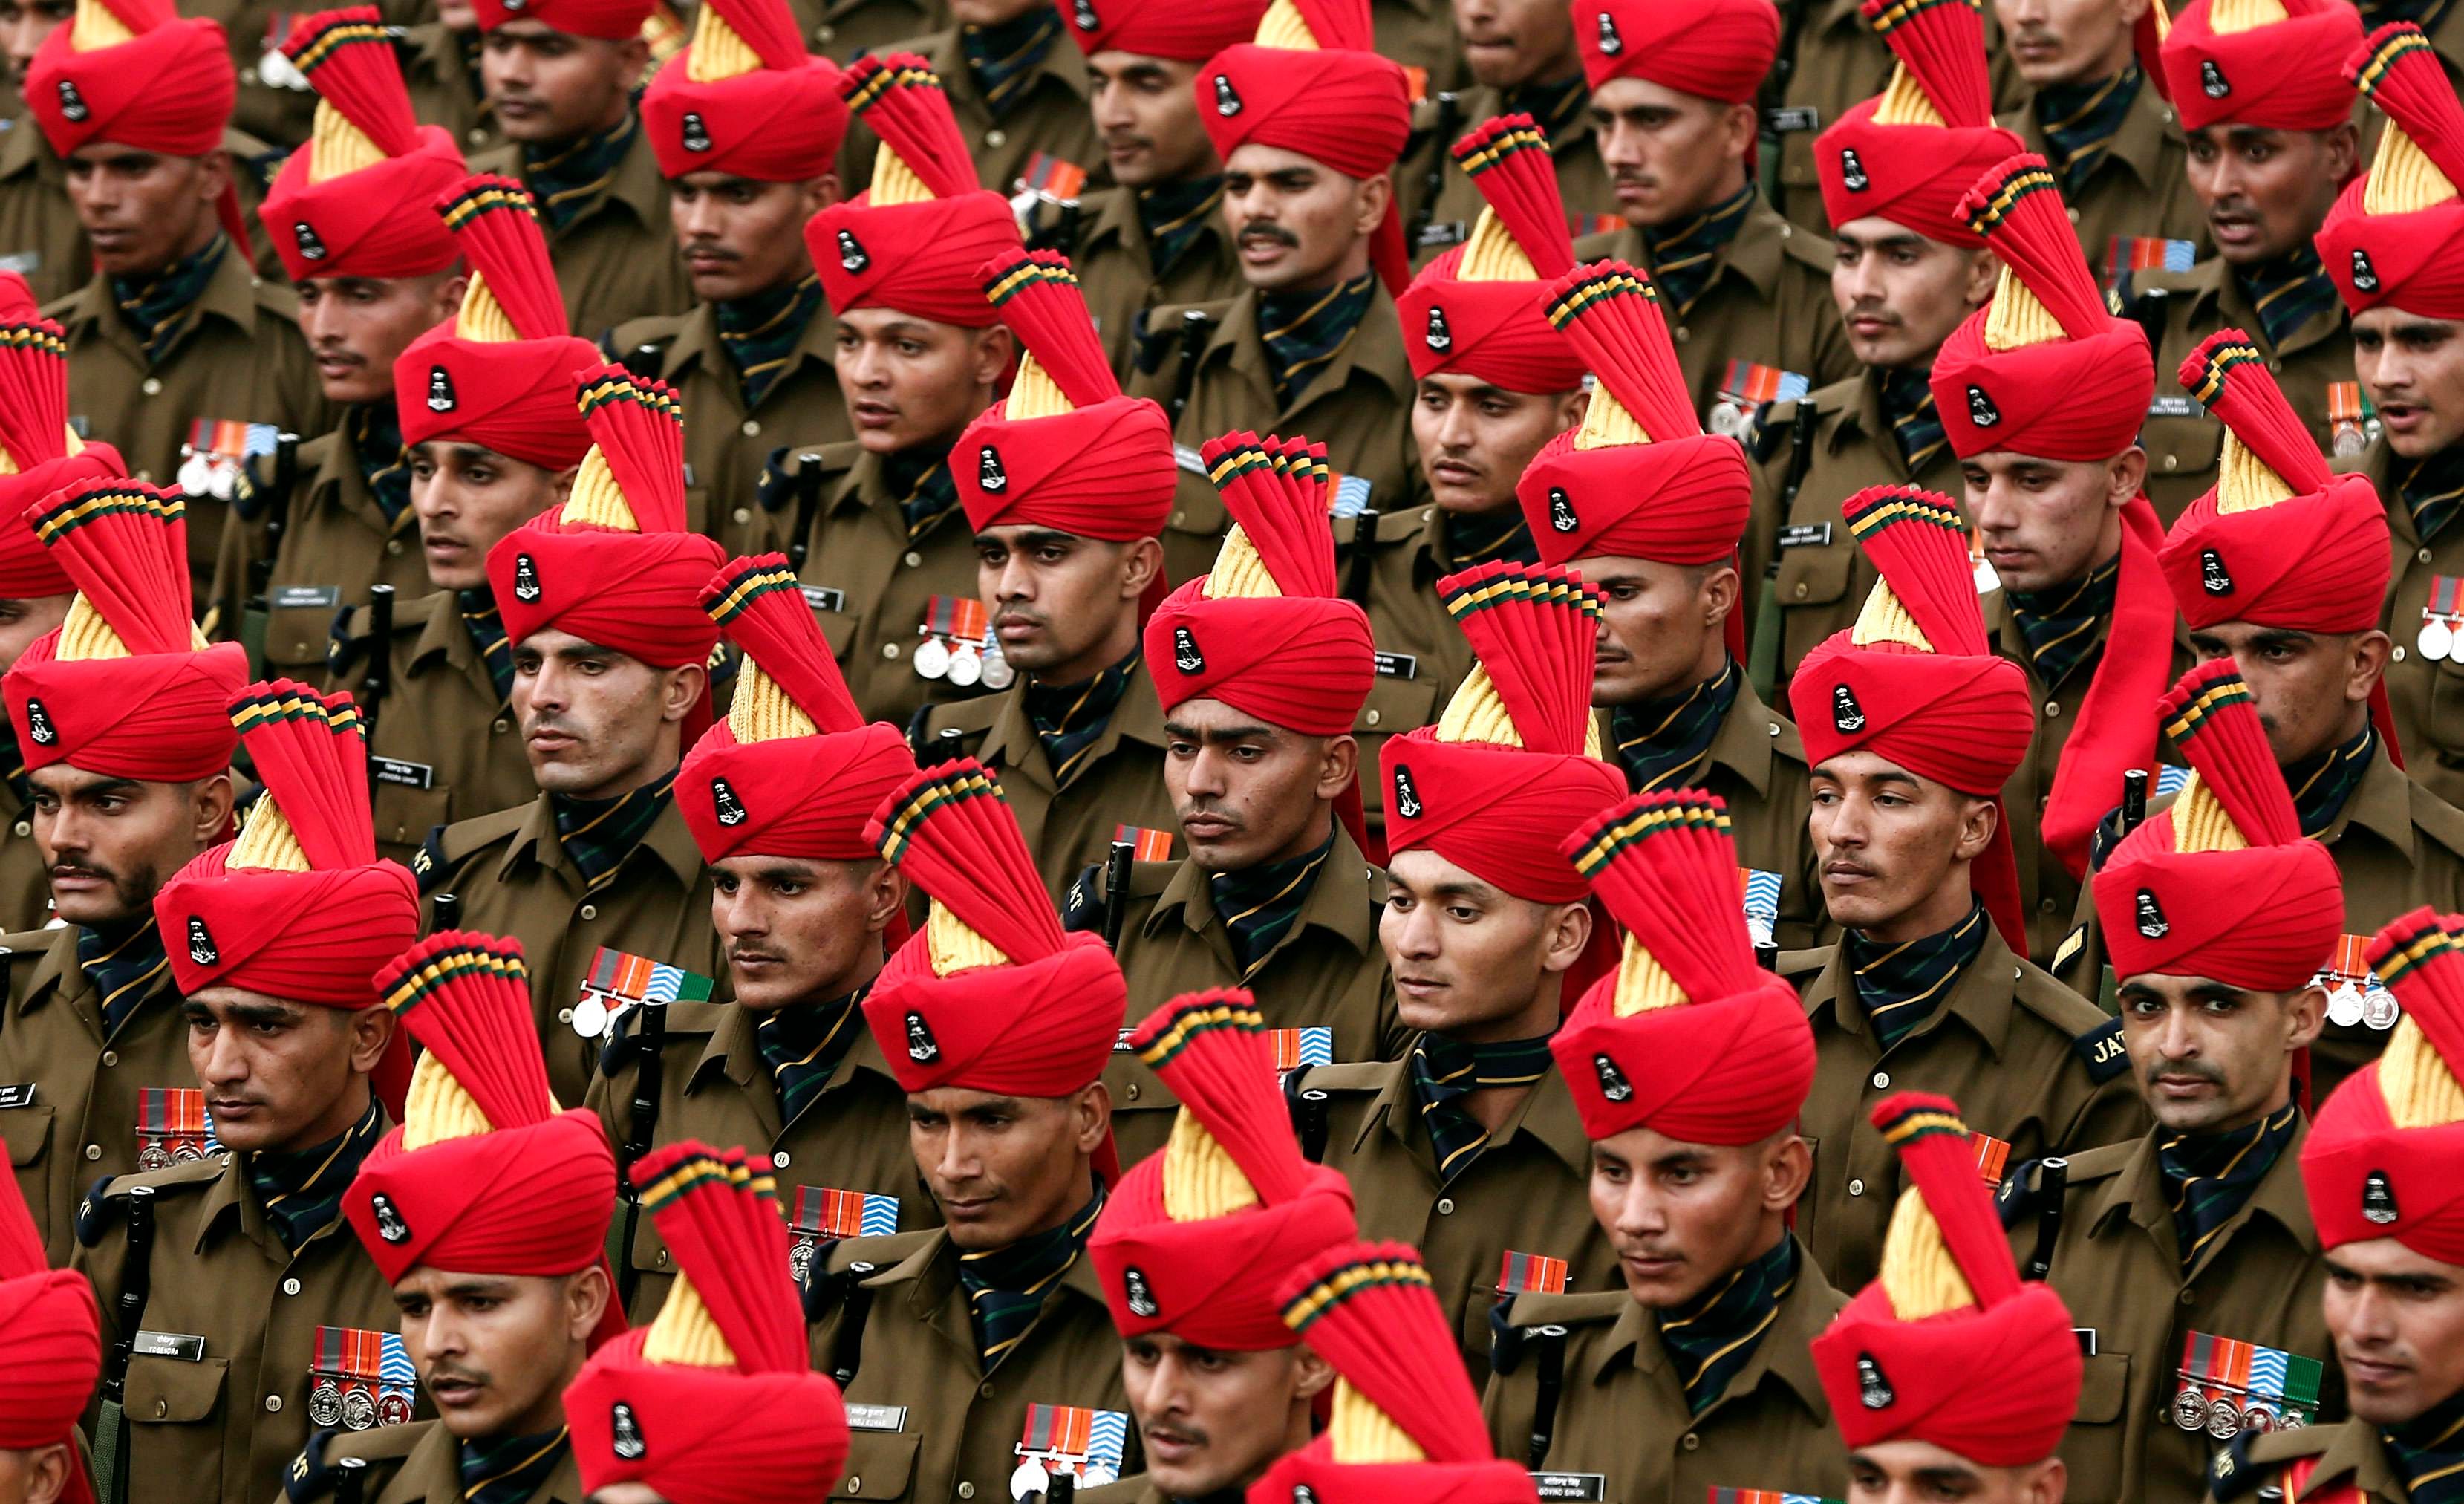 Indian soldiers march during a full dress rehearsal for the Republic Day parade in New Delhi January 23, 2015. India's capital will turn into a virtual fortress for US President Barack Obama's visit this weekend, with heightened security measures, including an extended no-fly zone, to protect the world's most powerful leader. Photo: Reuters